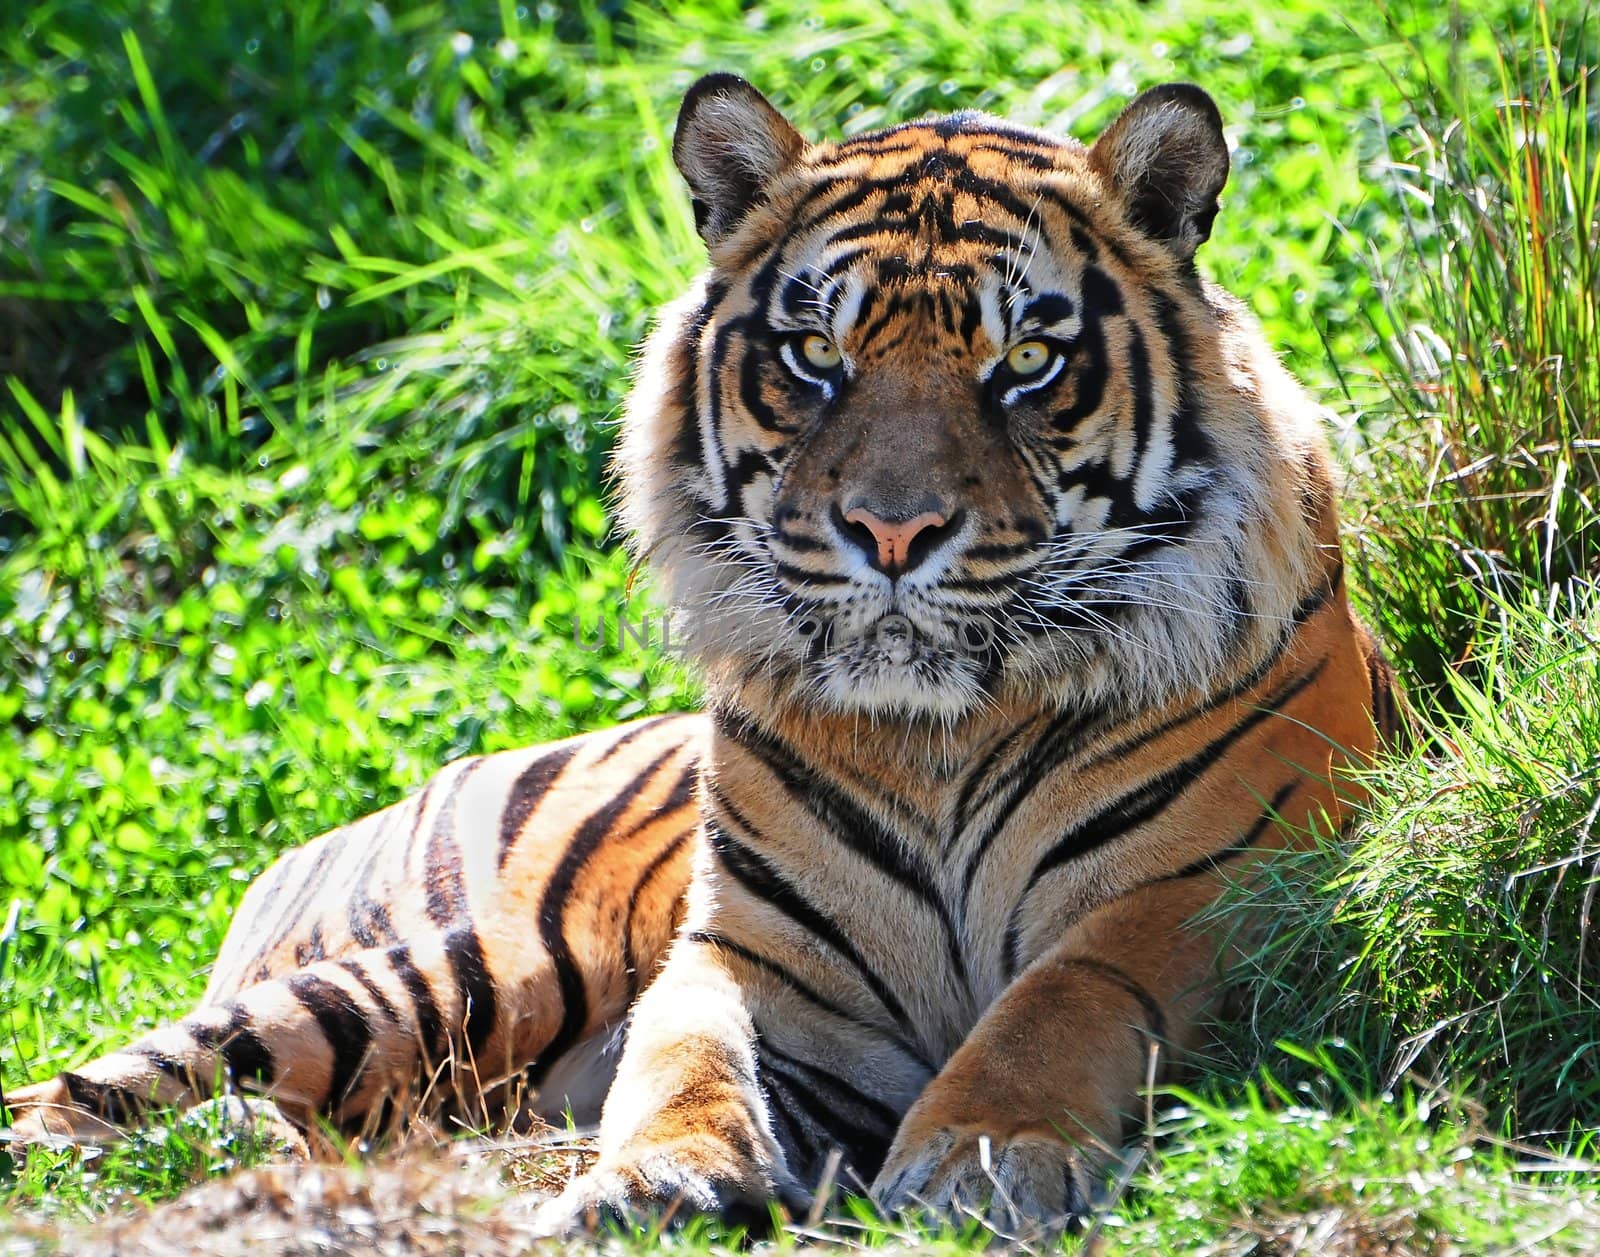 Portrait of an adult male Asian tiger with frightening eyes